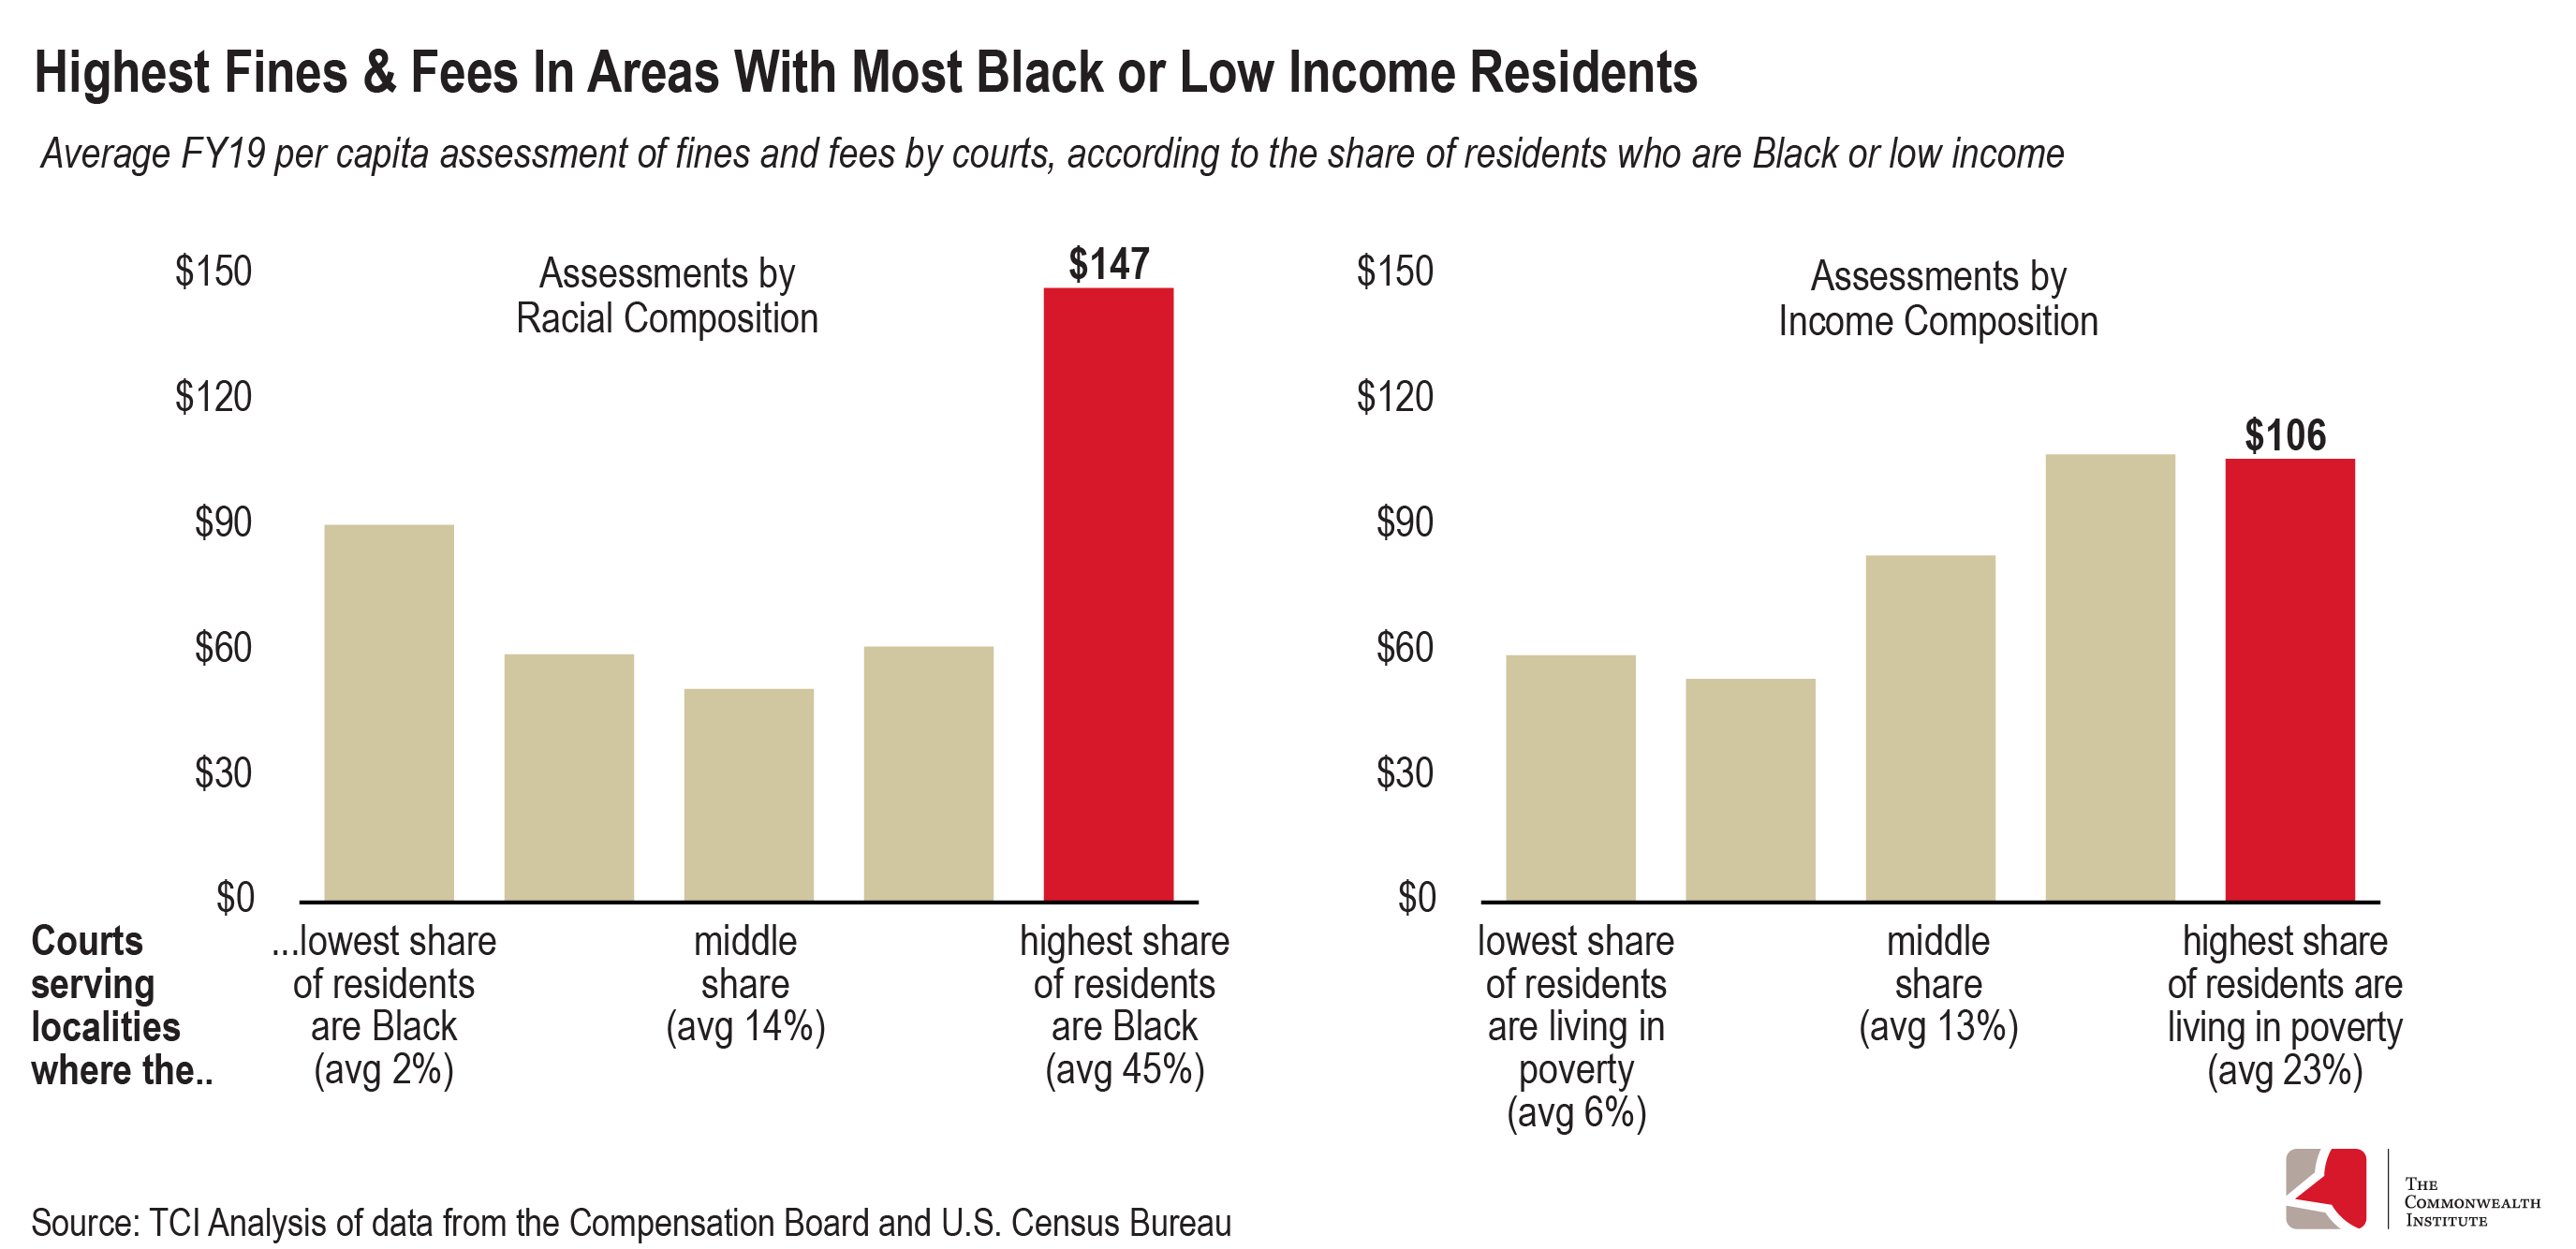 Two bar graphs show the difference in the average total of fines and fees assessed in districts based on race and income, indicating that districts with the highest shares of Black people and of people living in poverty face the highest fines and fees.